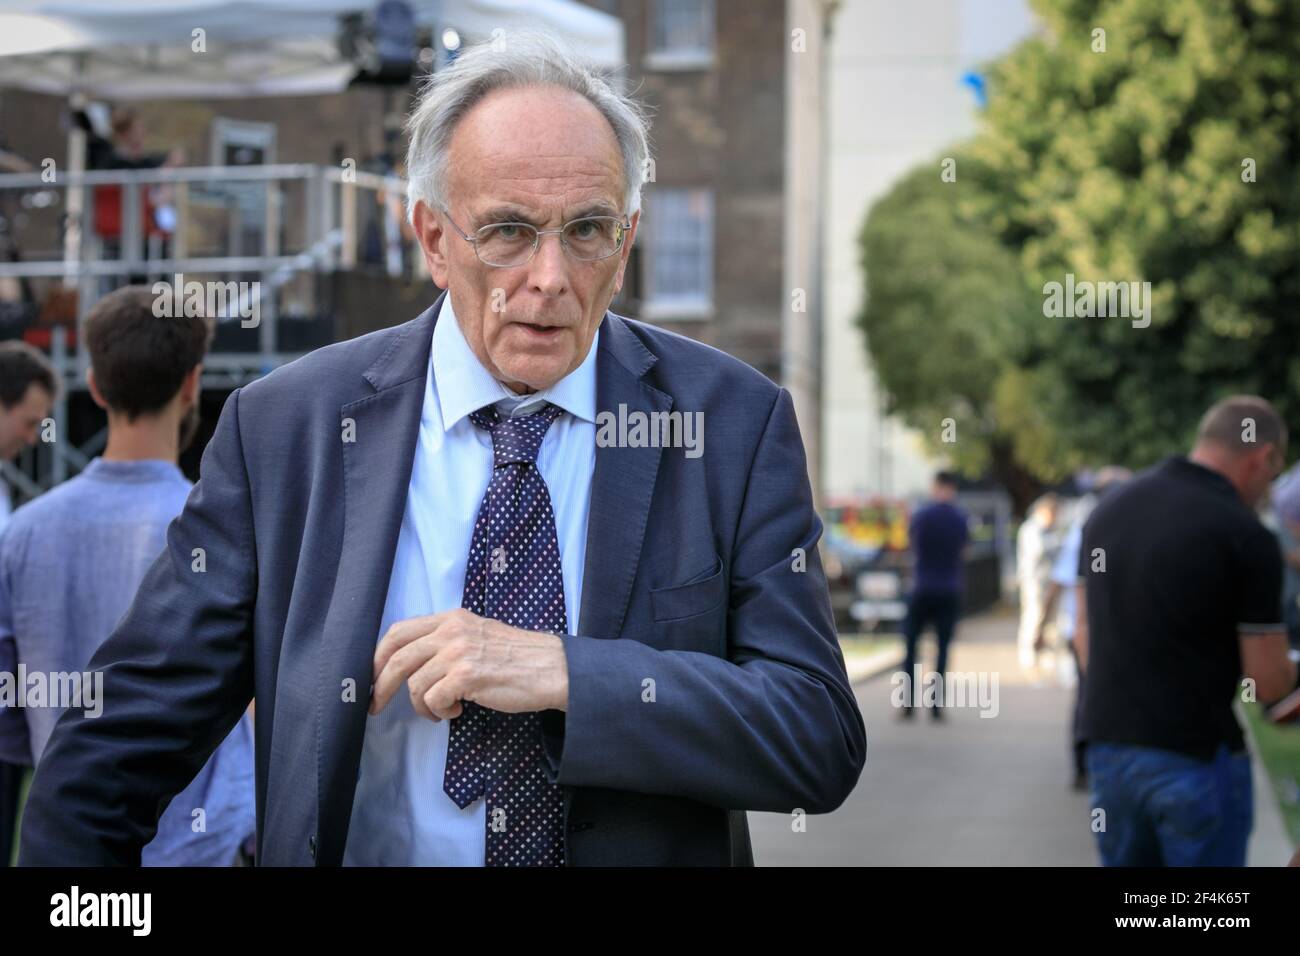 Peter Bone MP, British Conservative Party Politician, Member of Parliament for Wellingborough, walks in Westminster, London, UK Stock Photo